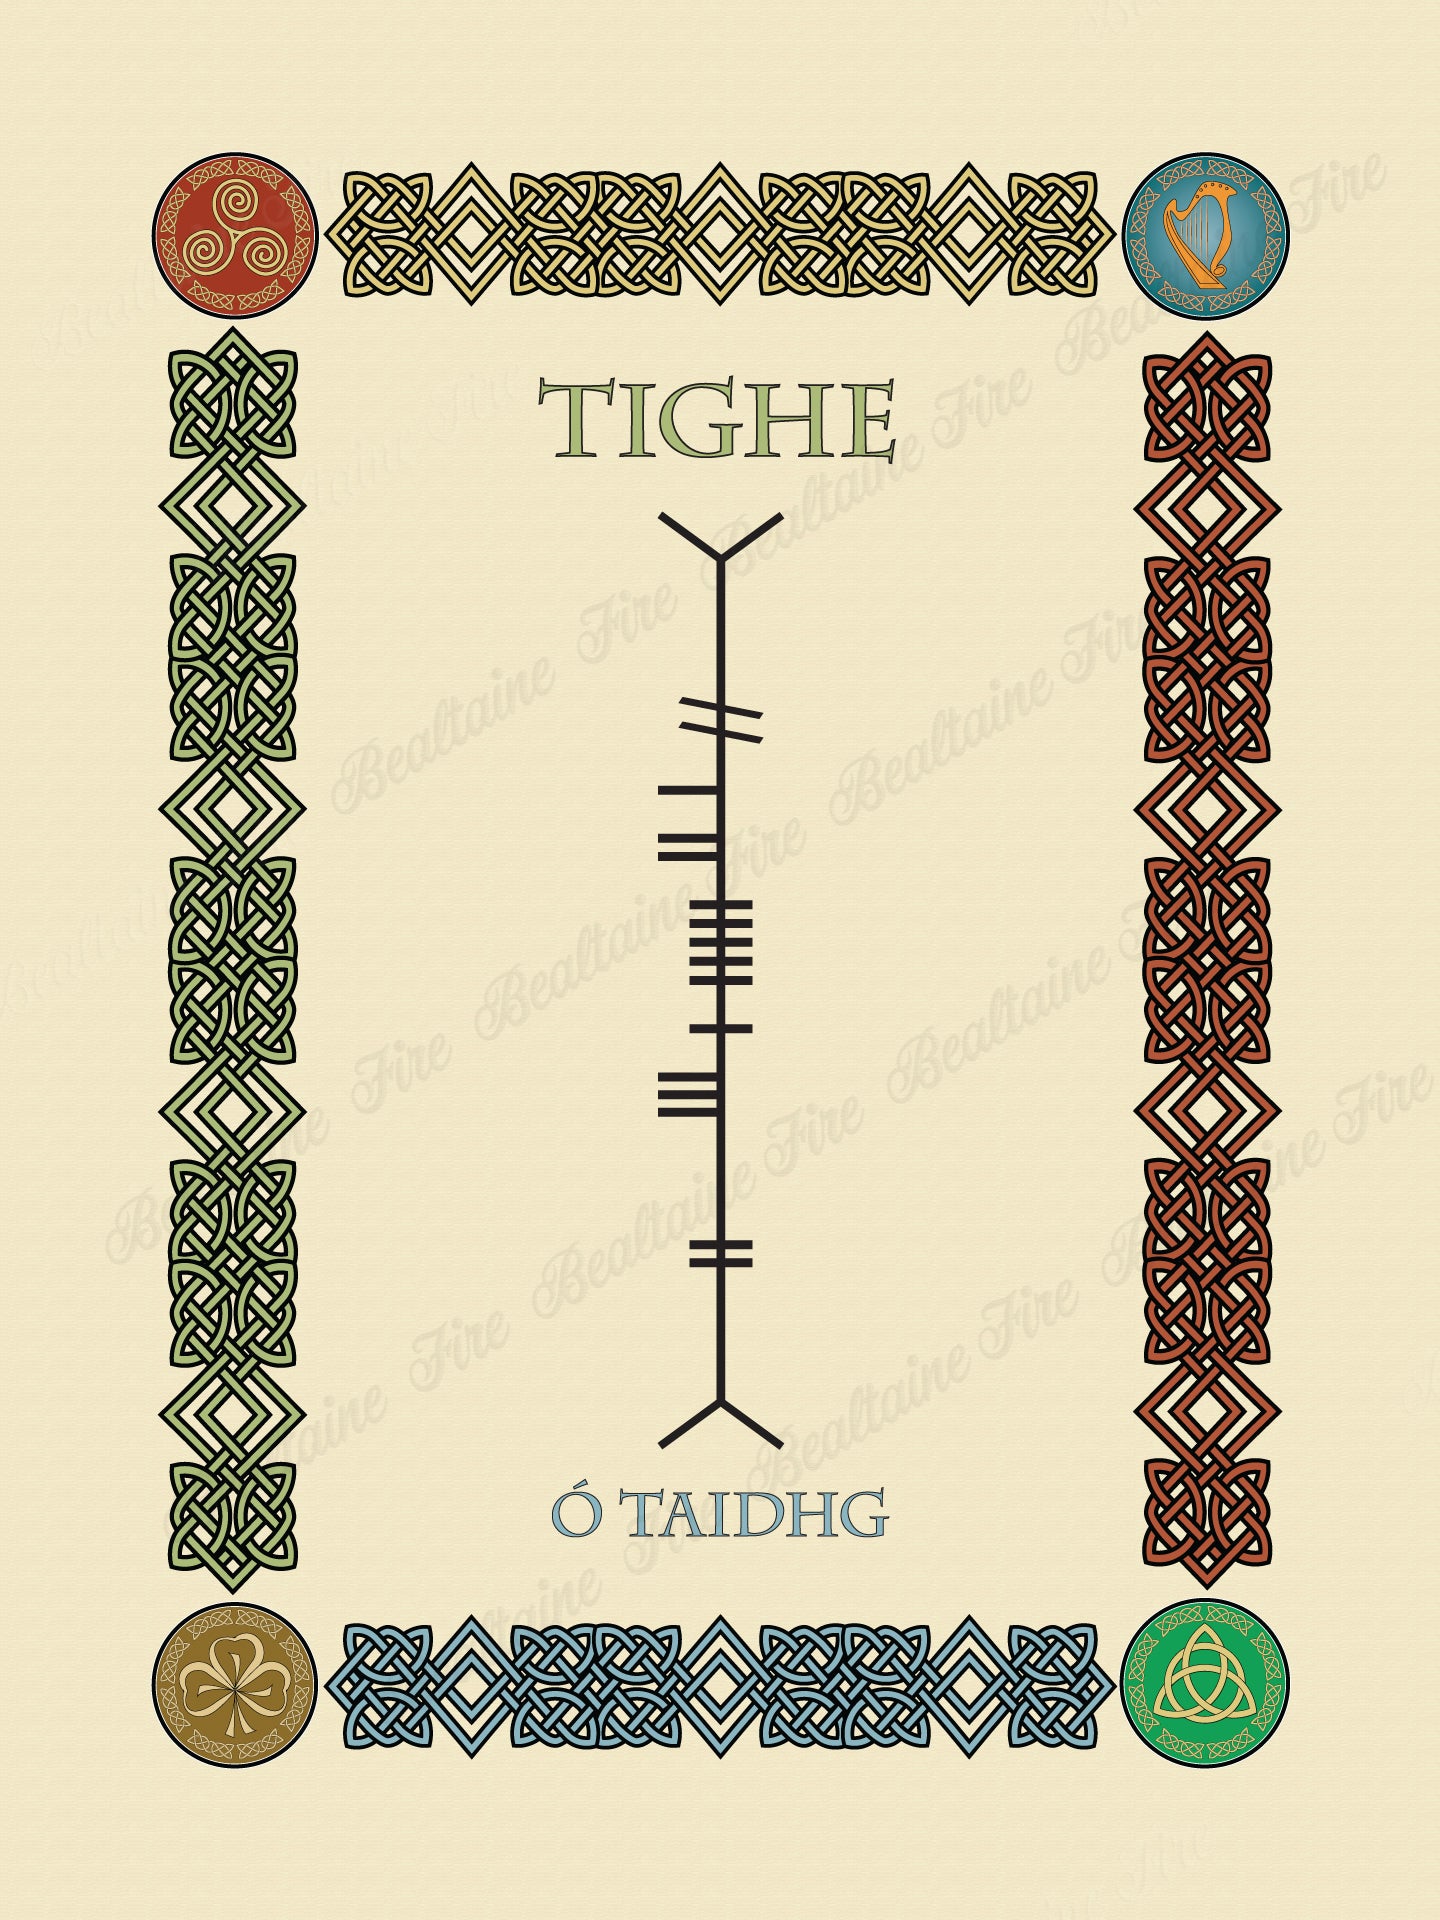 Tighe in Old Irish and Ogham - Premium luster unframed print